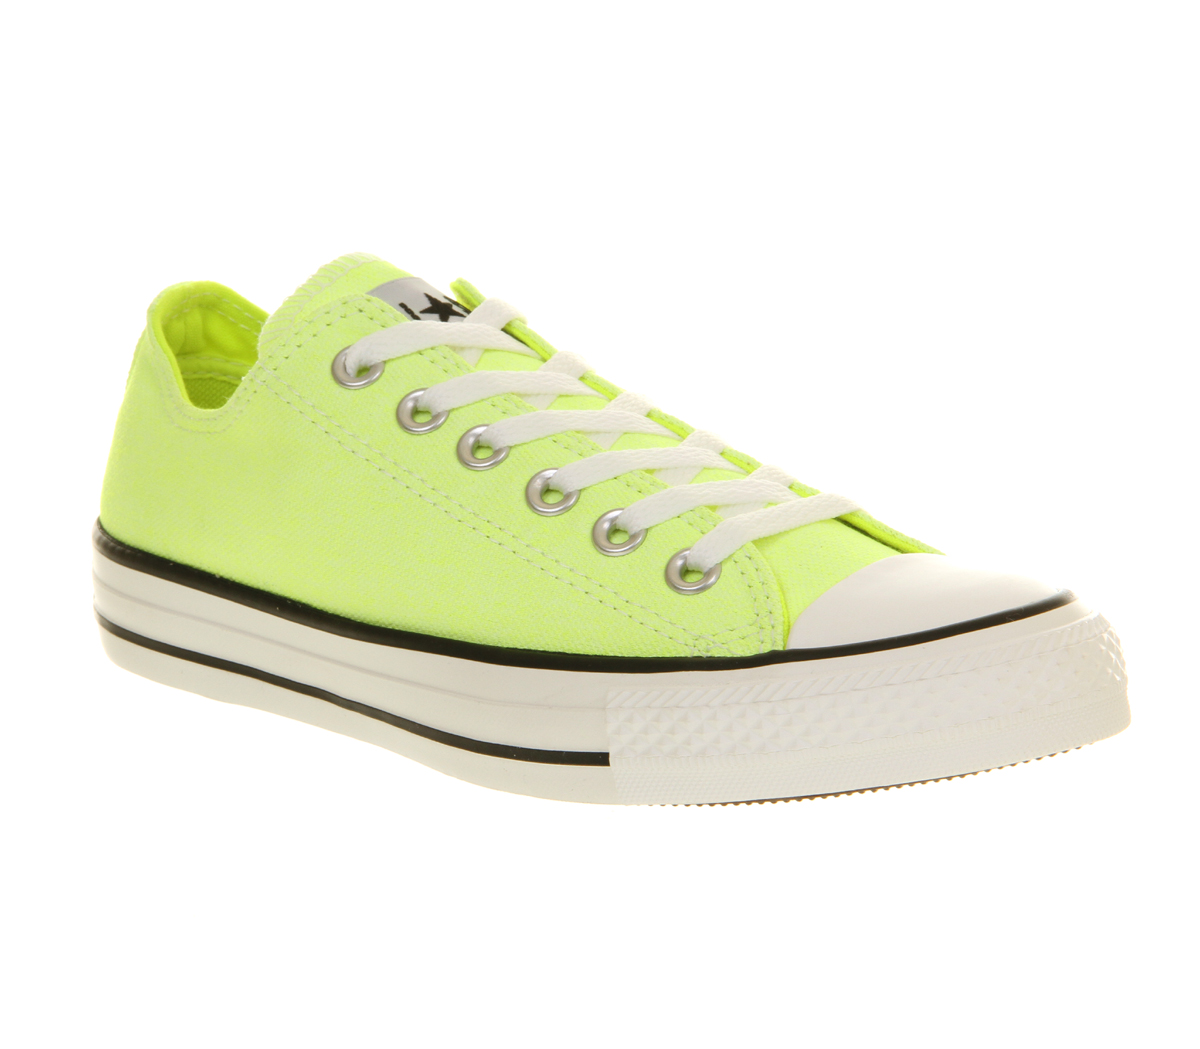 Converse All Star Low Faded Neon Yellow 